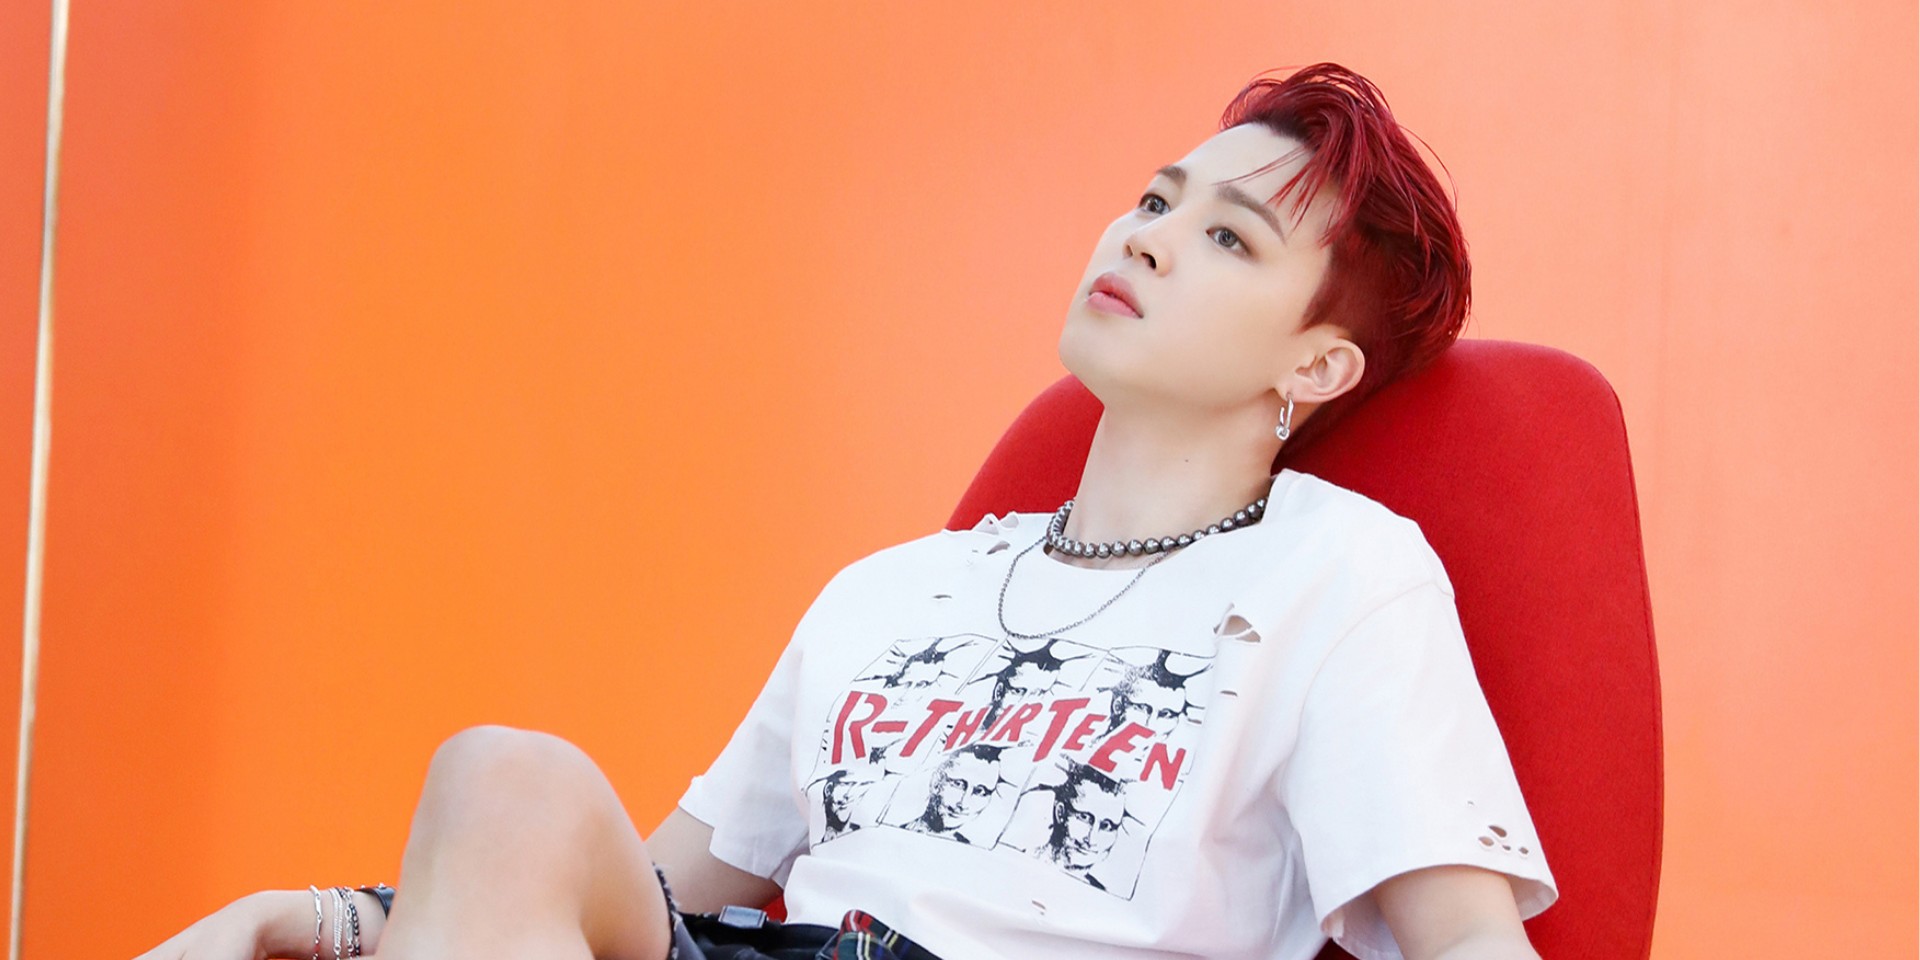 BTS' Jimin donates 100 million won to polio patients in need 